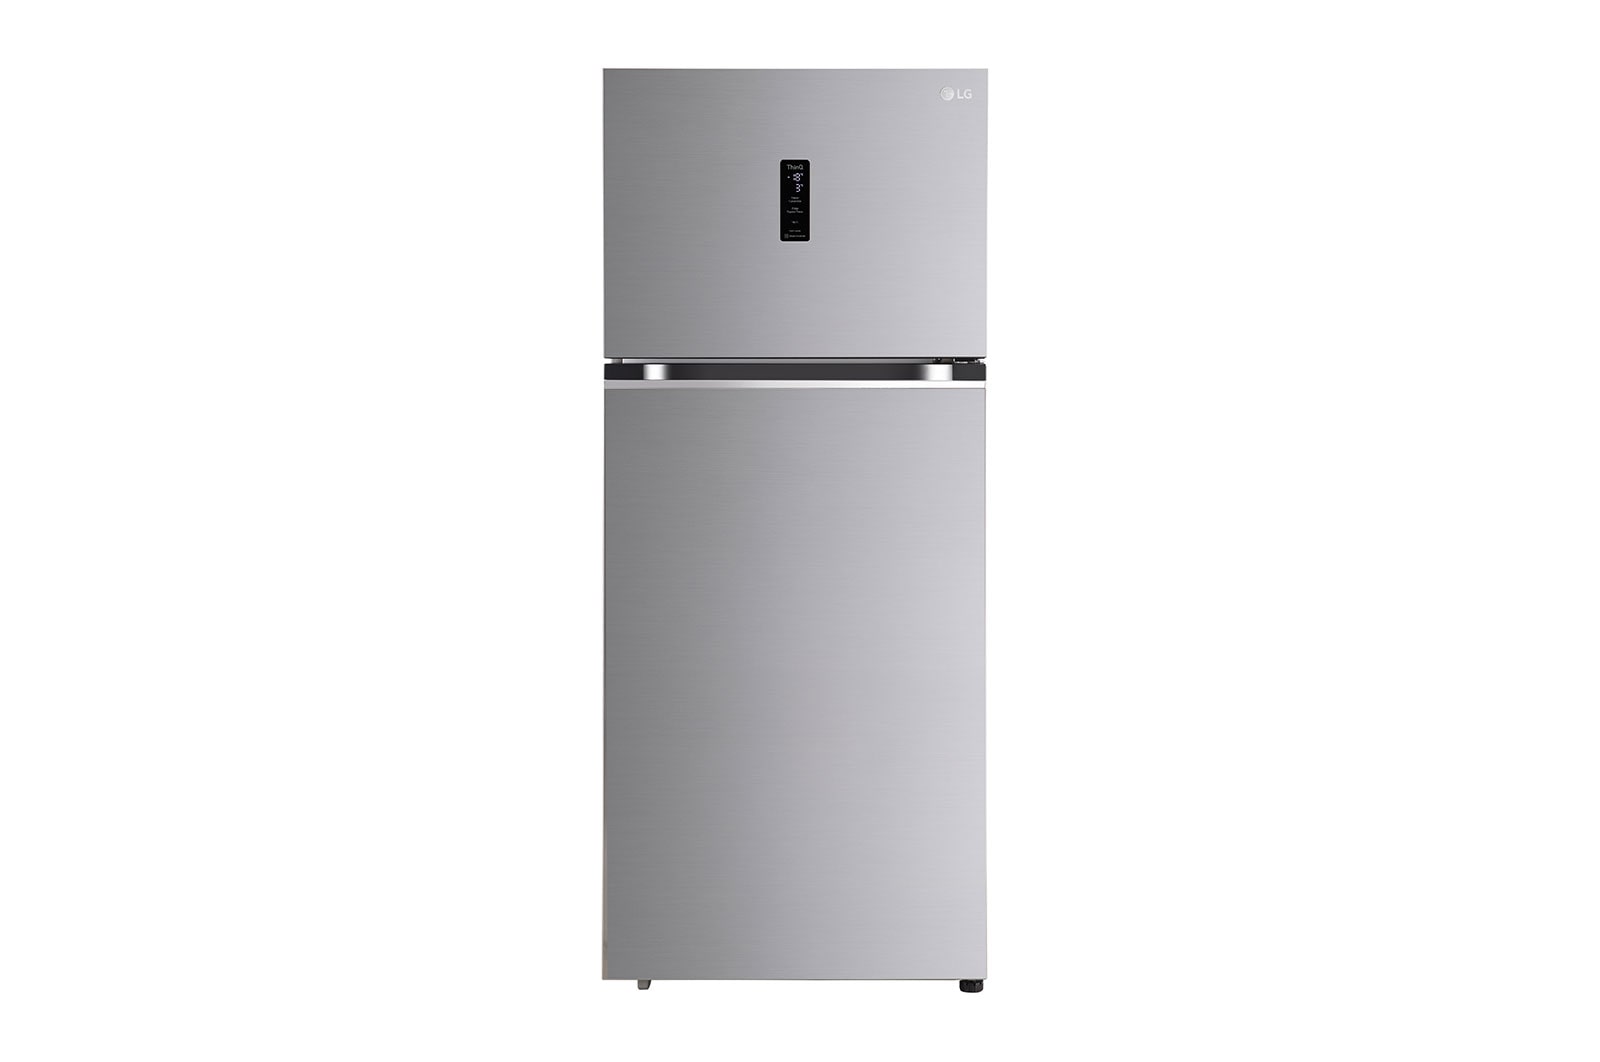 LG 380L, 3 Star, Smart Inverter Compressor, Convertible, Wi-Fi, Door Cooling™, Shiny Steel Finish, Frost-Free Double Door Refrigerator, GL-T412VPZX